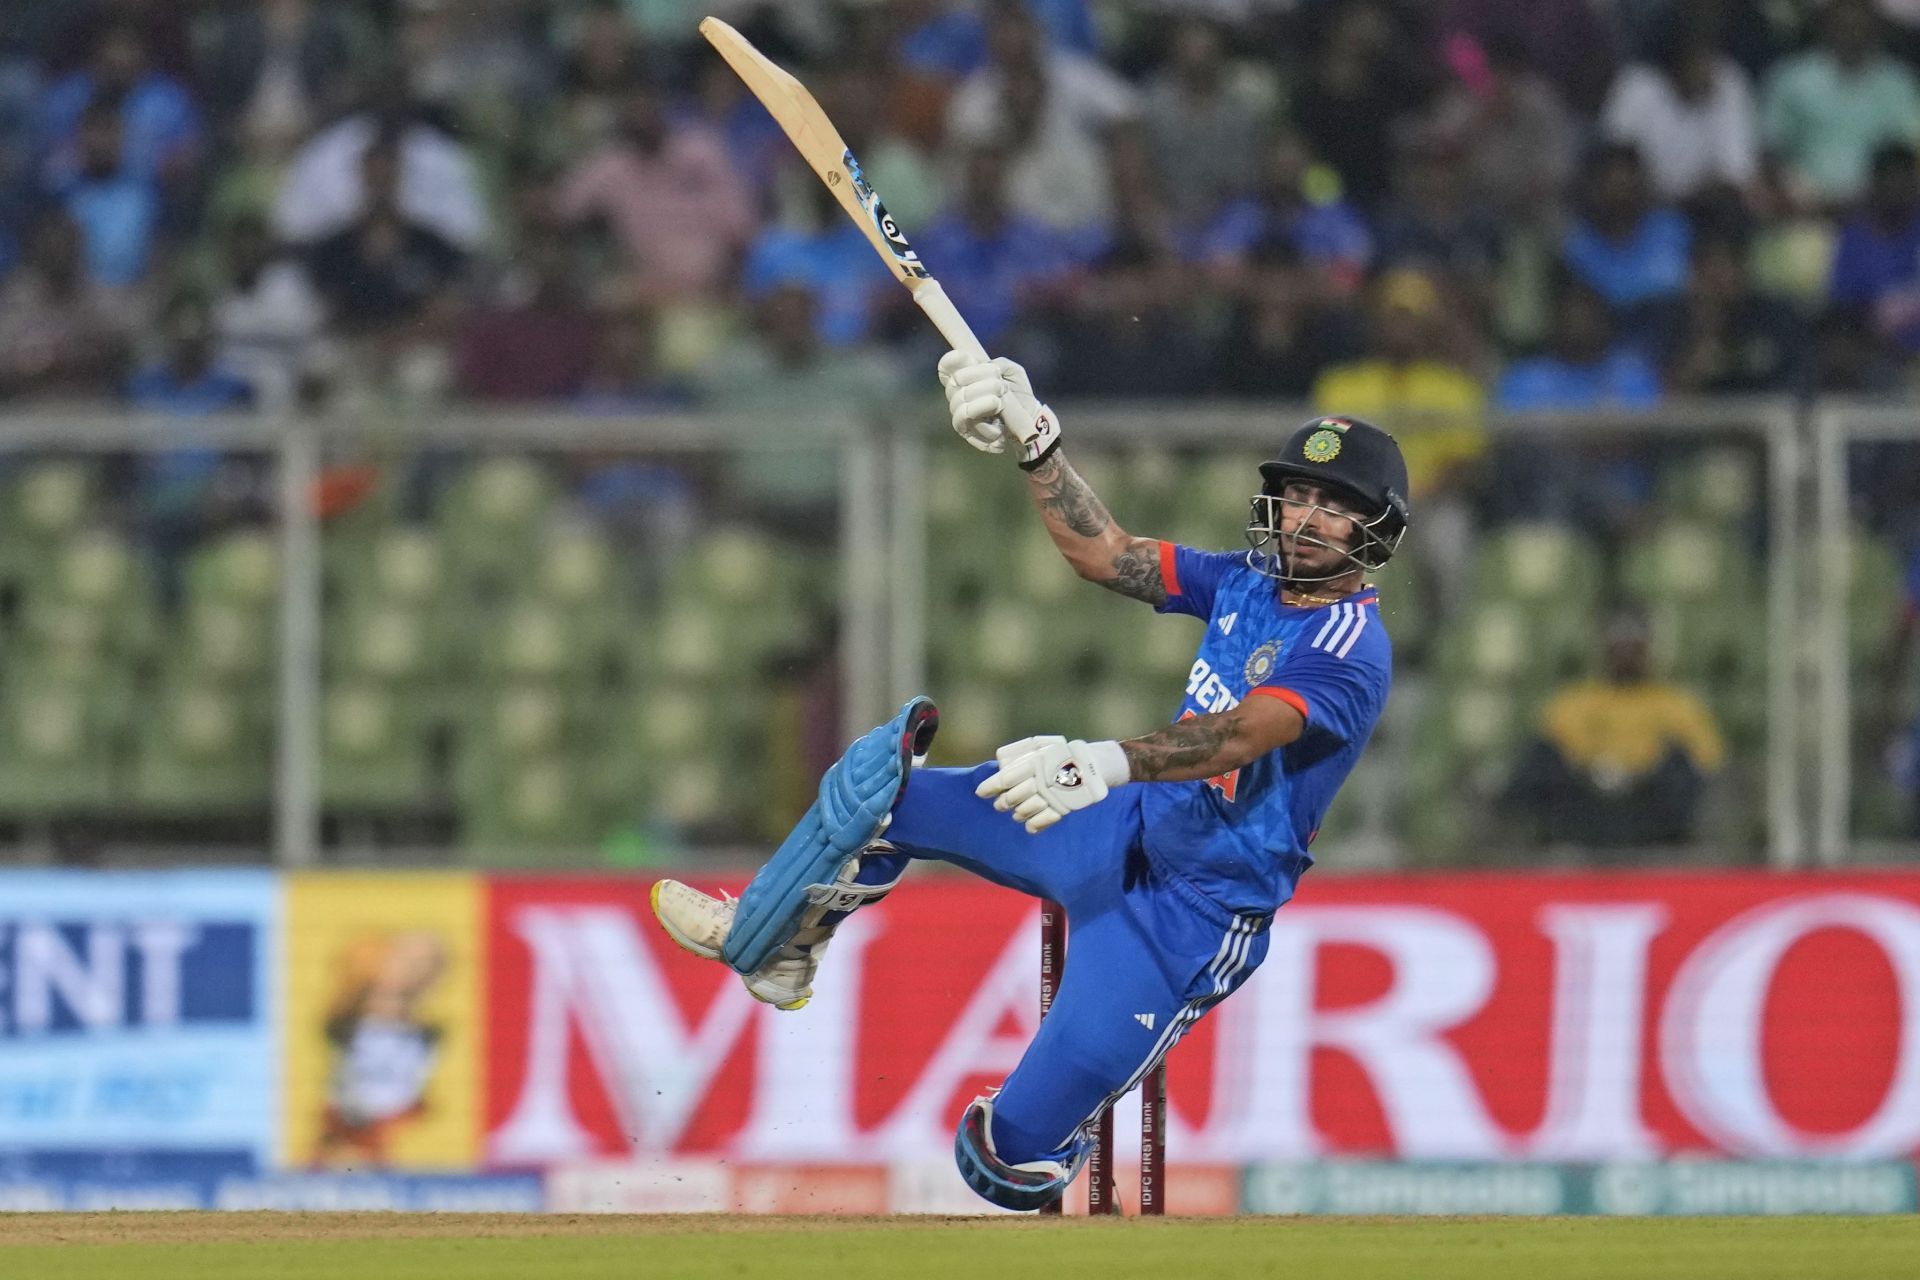 India could open the batting with Ishan Kishan